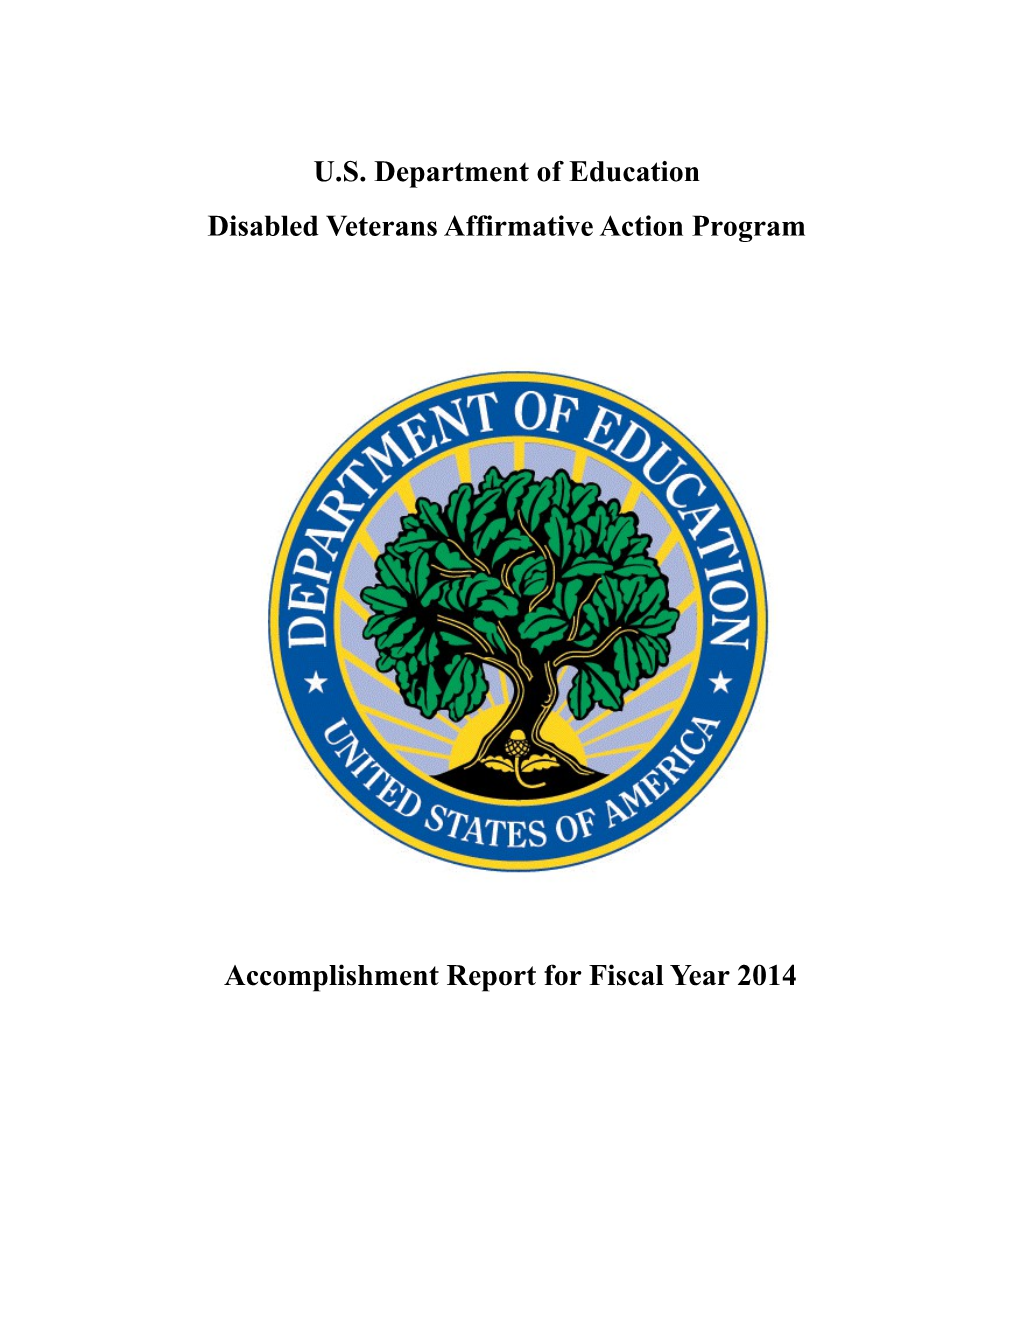 Disabled Veterans Affirmative Action Program - Accomplishment Report for Fiscal Year 2014